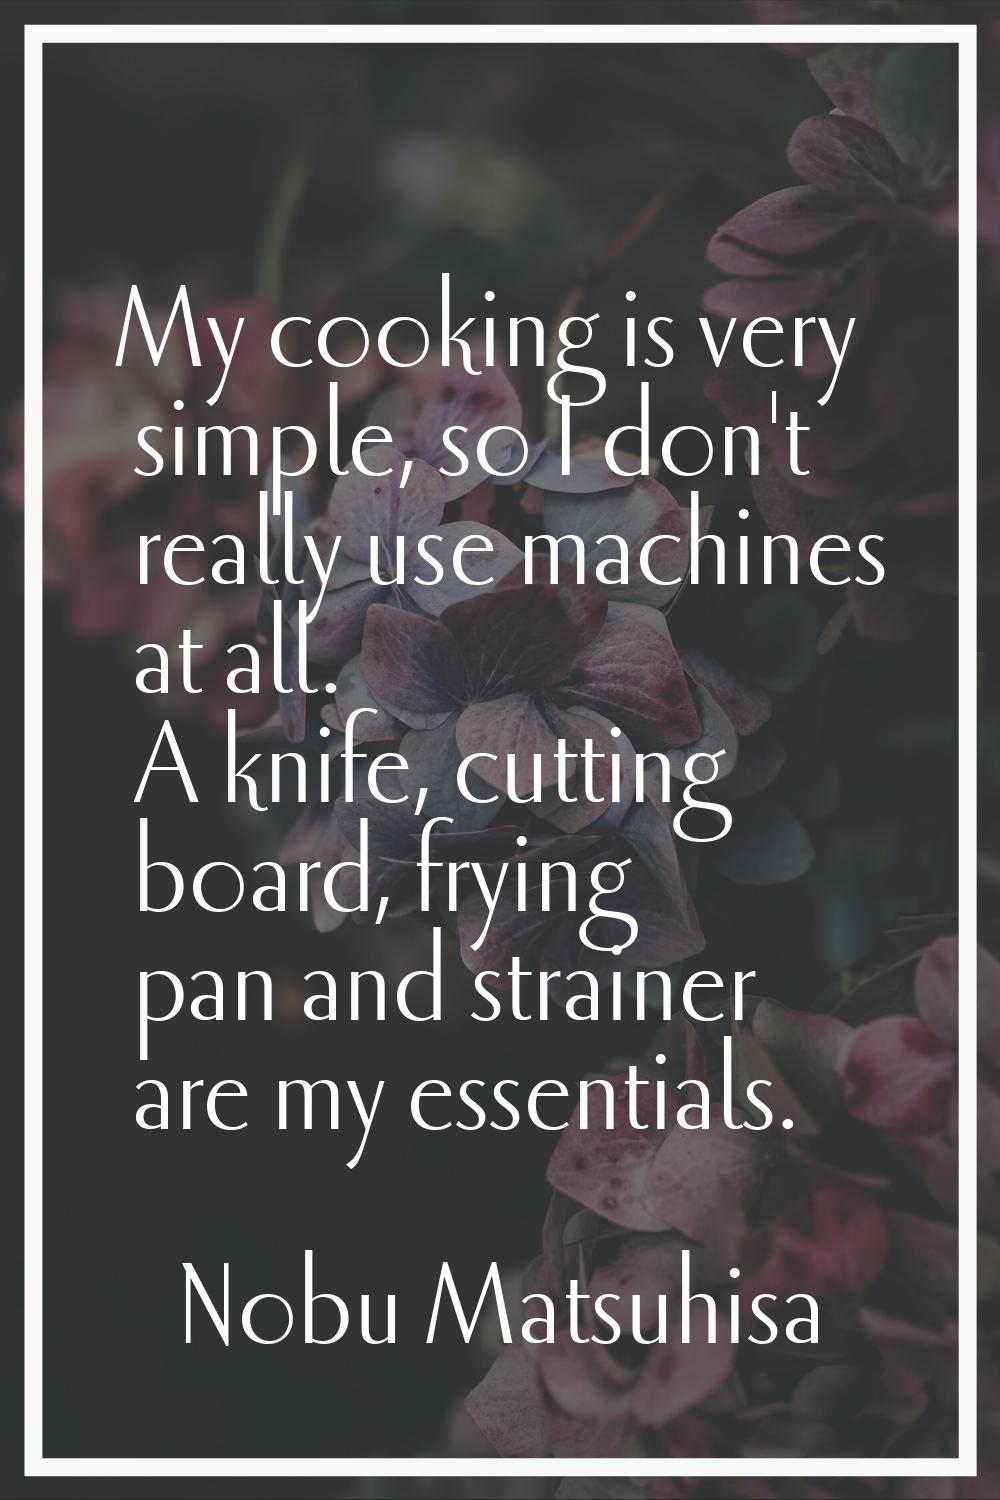 My cooking is very simple, so I don't really use machines at all. A knife, cutting board, frying pa